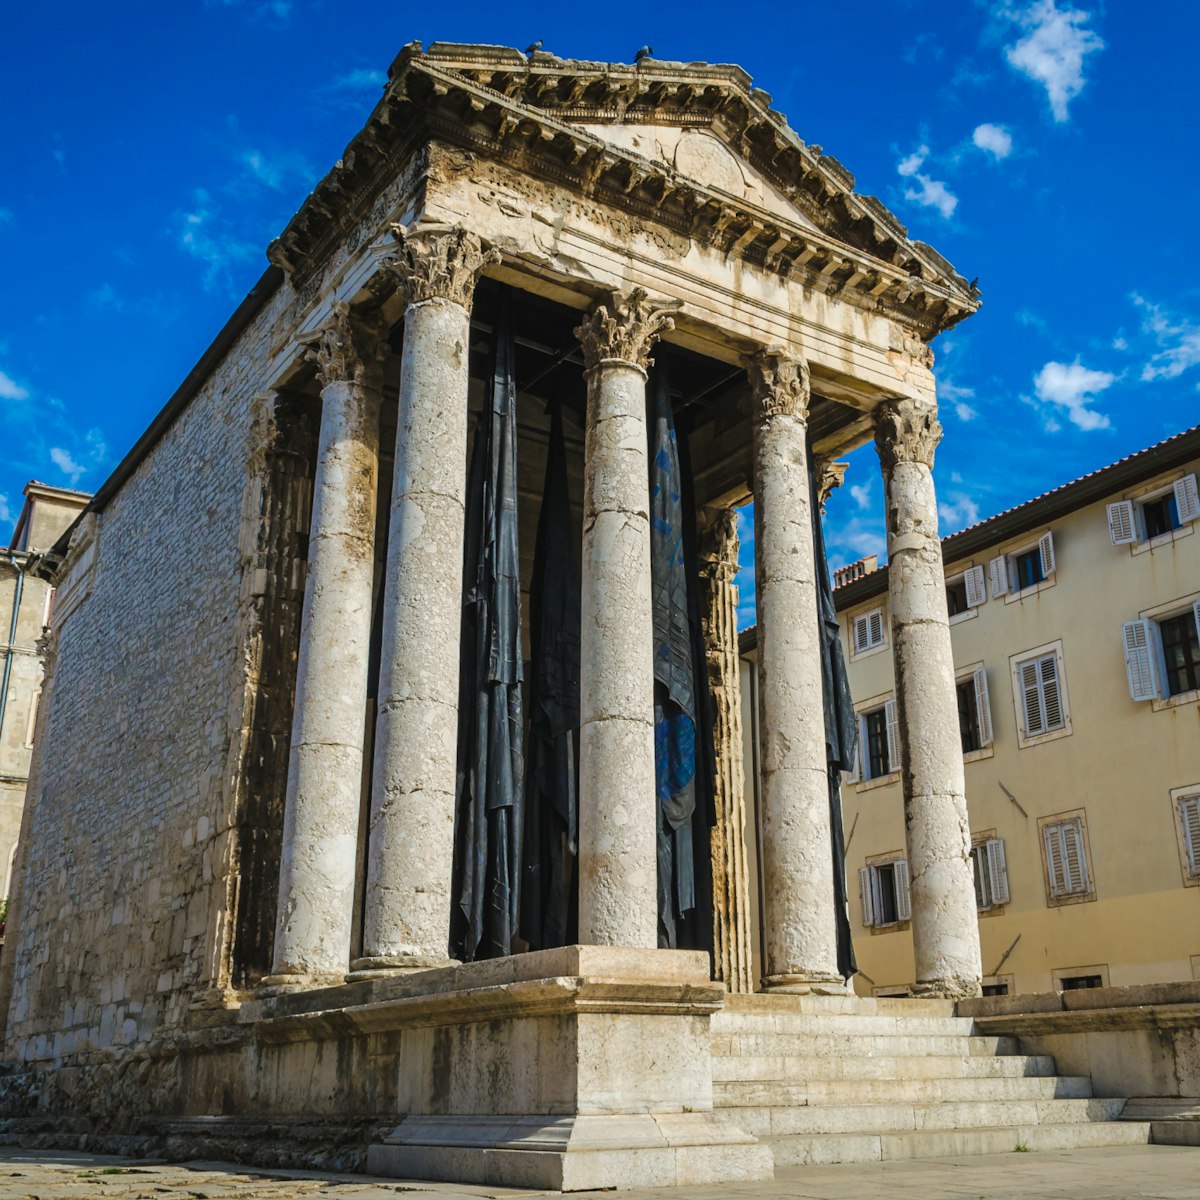 Pula Croatia, Istria Peninsula 17.09.2018..Temple of Augustus..Arch of the Sergii..Pula Communal Palace; Shutterstock ID 1232040358; Your name (First / Last): Anna Tyler; GL account no.: 65050; Netsuite department name: Online Editorial; Full Product or Project name including edition: destination-image-southern-europe